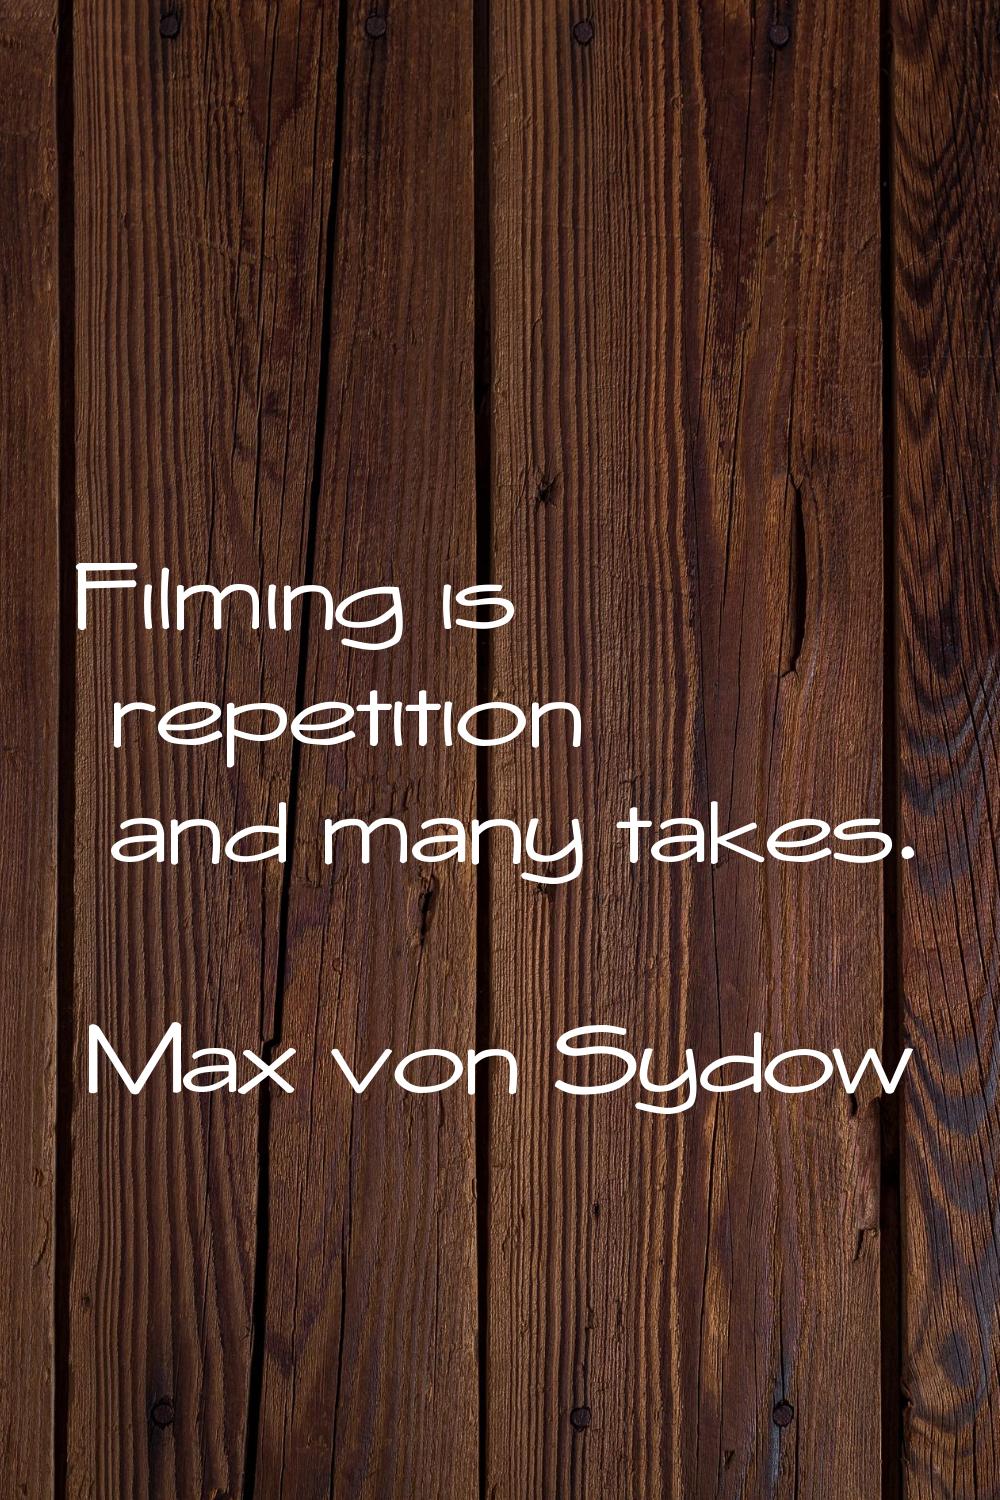 Filming is repetition and many takes.